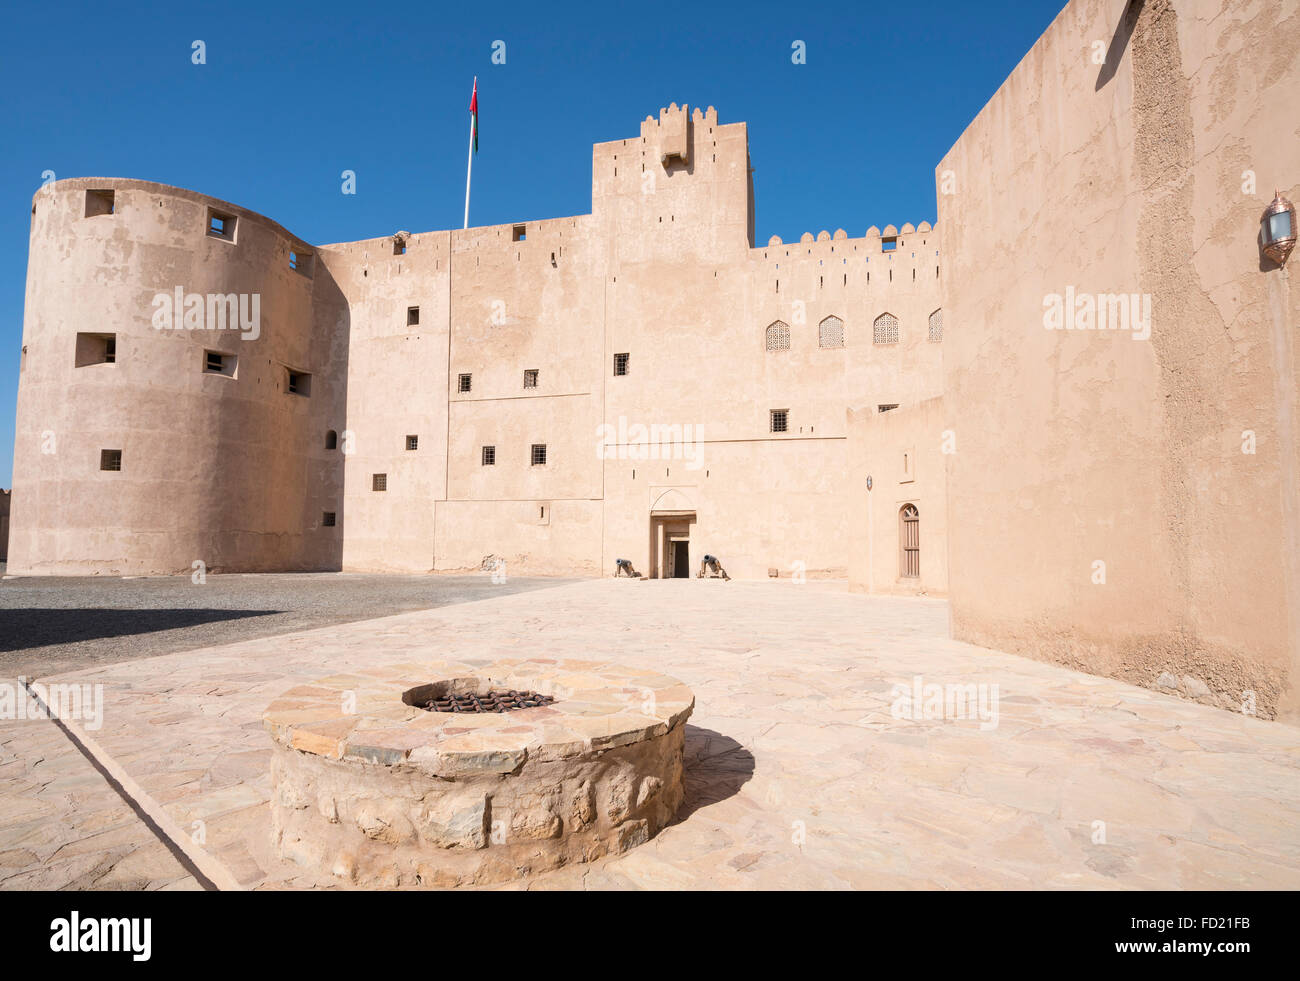 Exterior view of historic  Jabrin Fort in Oman Stock Photo